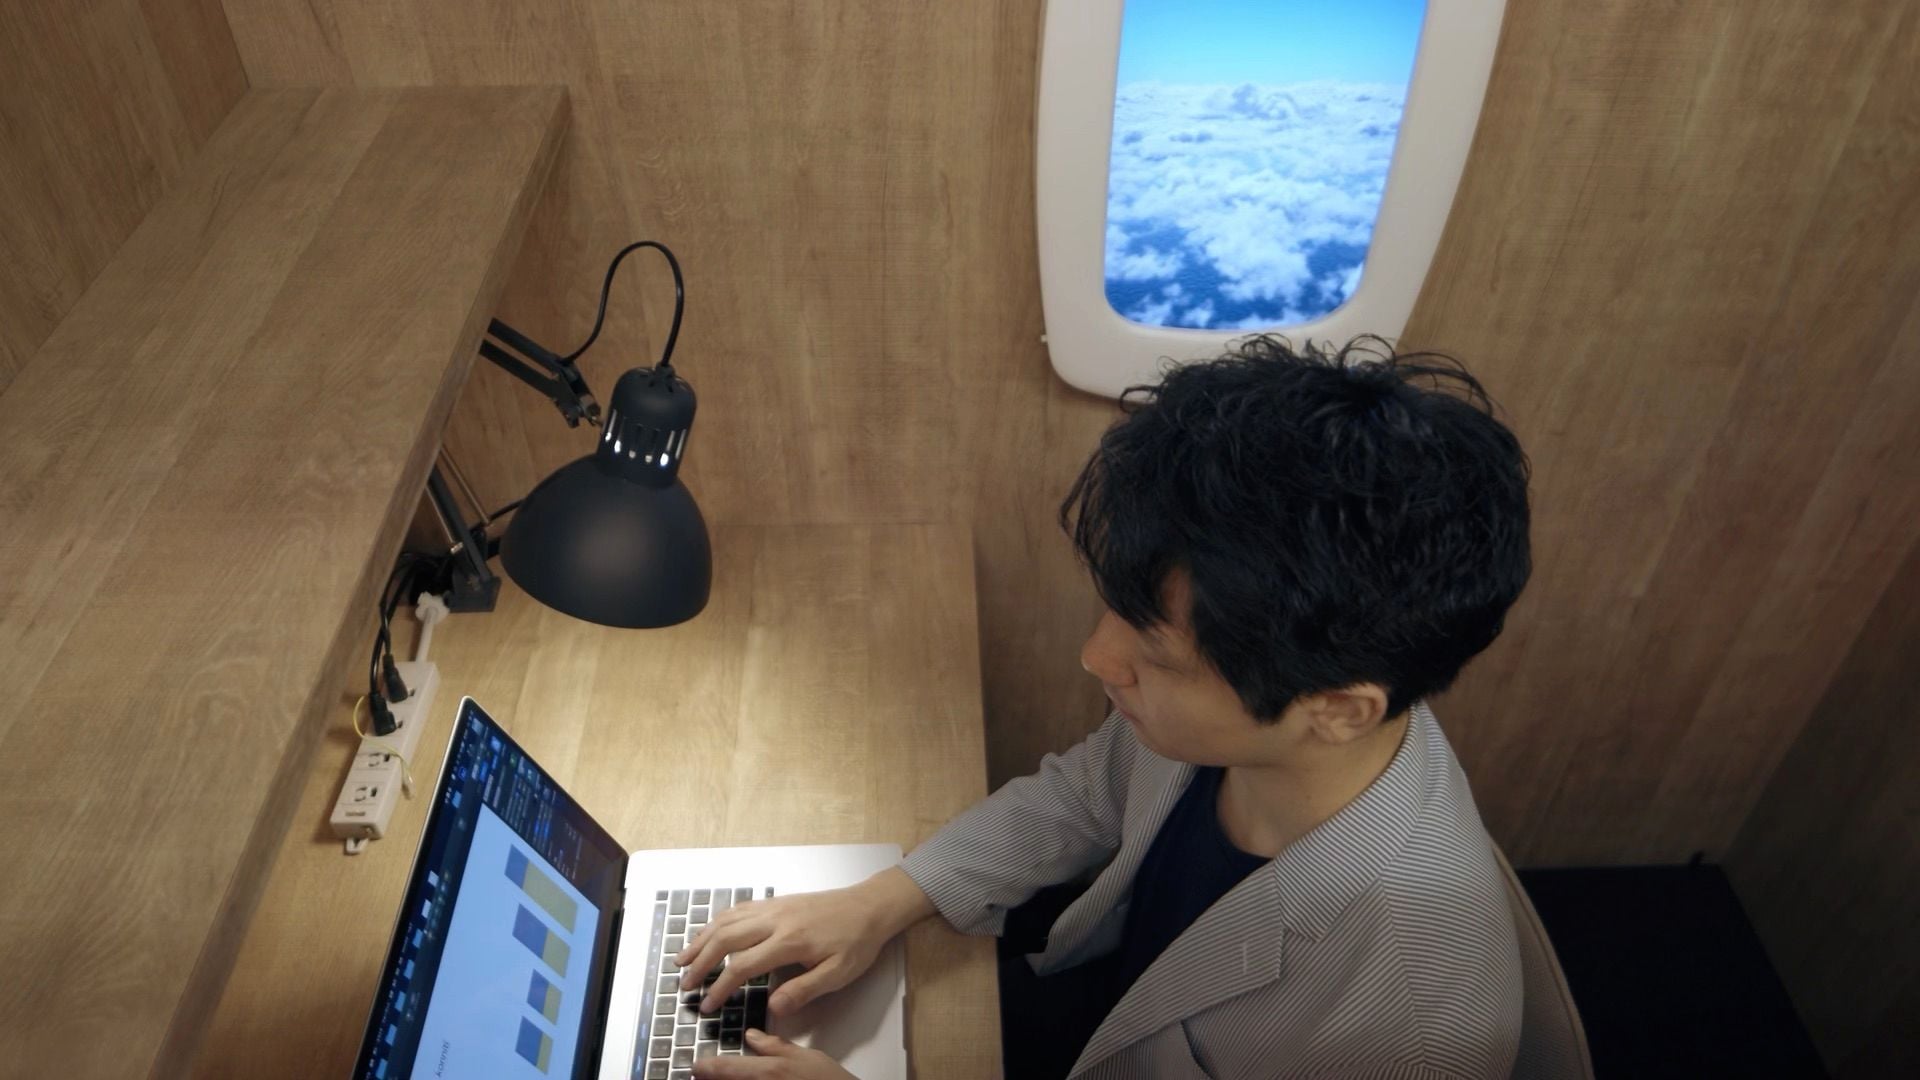 Man works at his desk while the Sky Scape digital airplane window displays a stunning view right next to him.